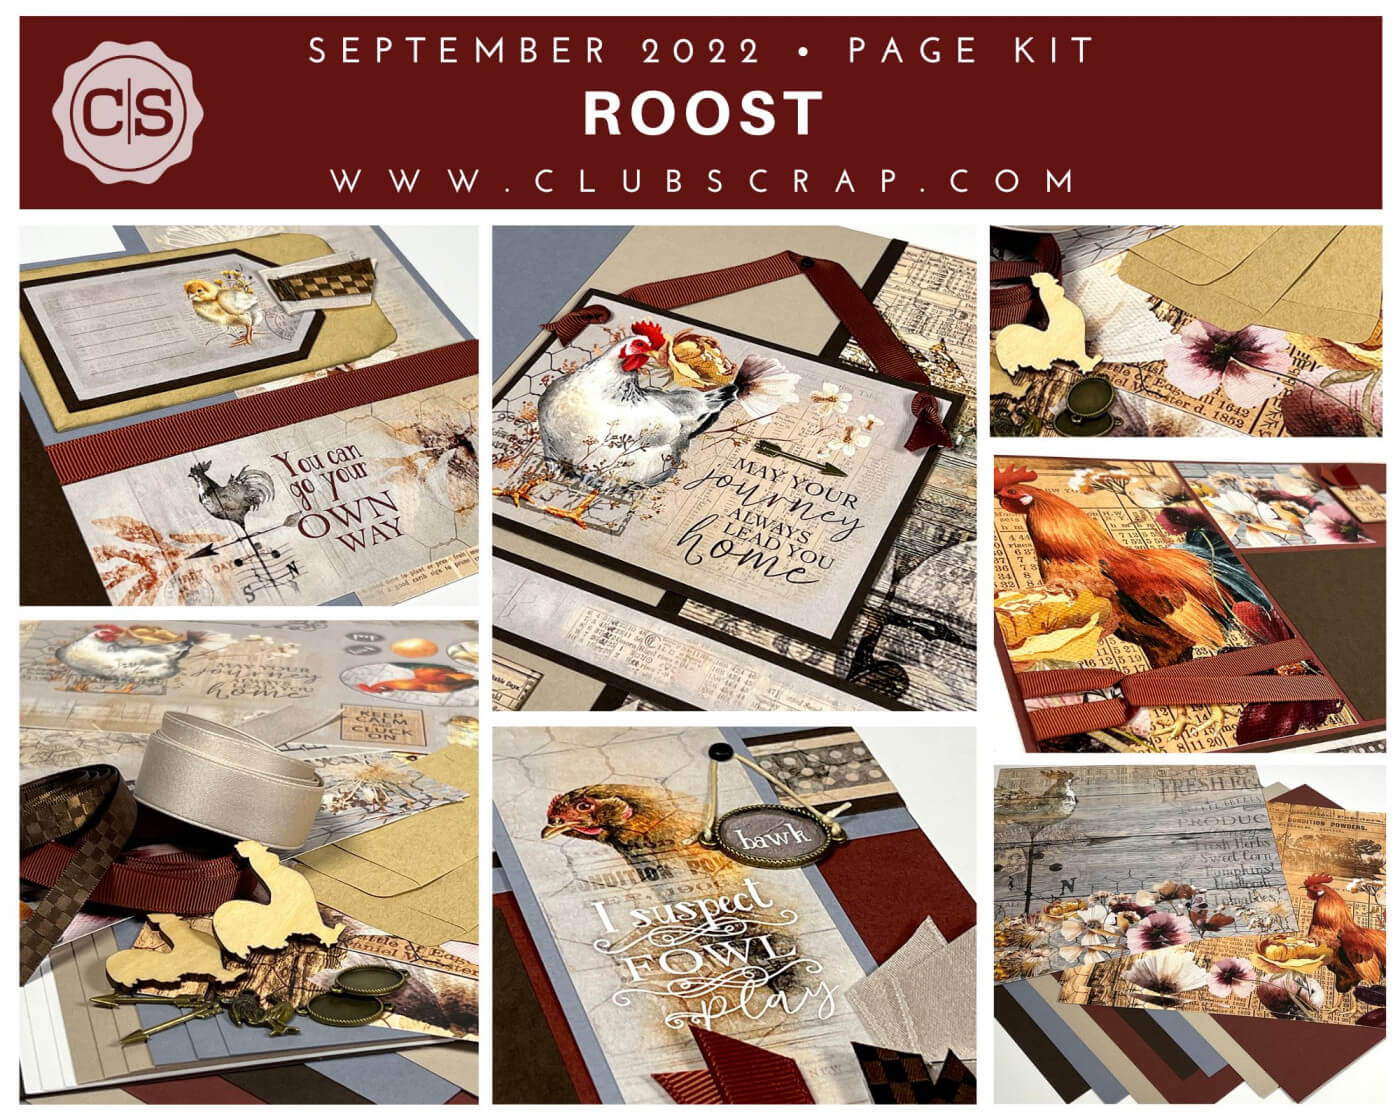 Roost Spoiler - Page Kit from Club Scrap #clubscrap